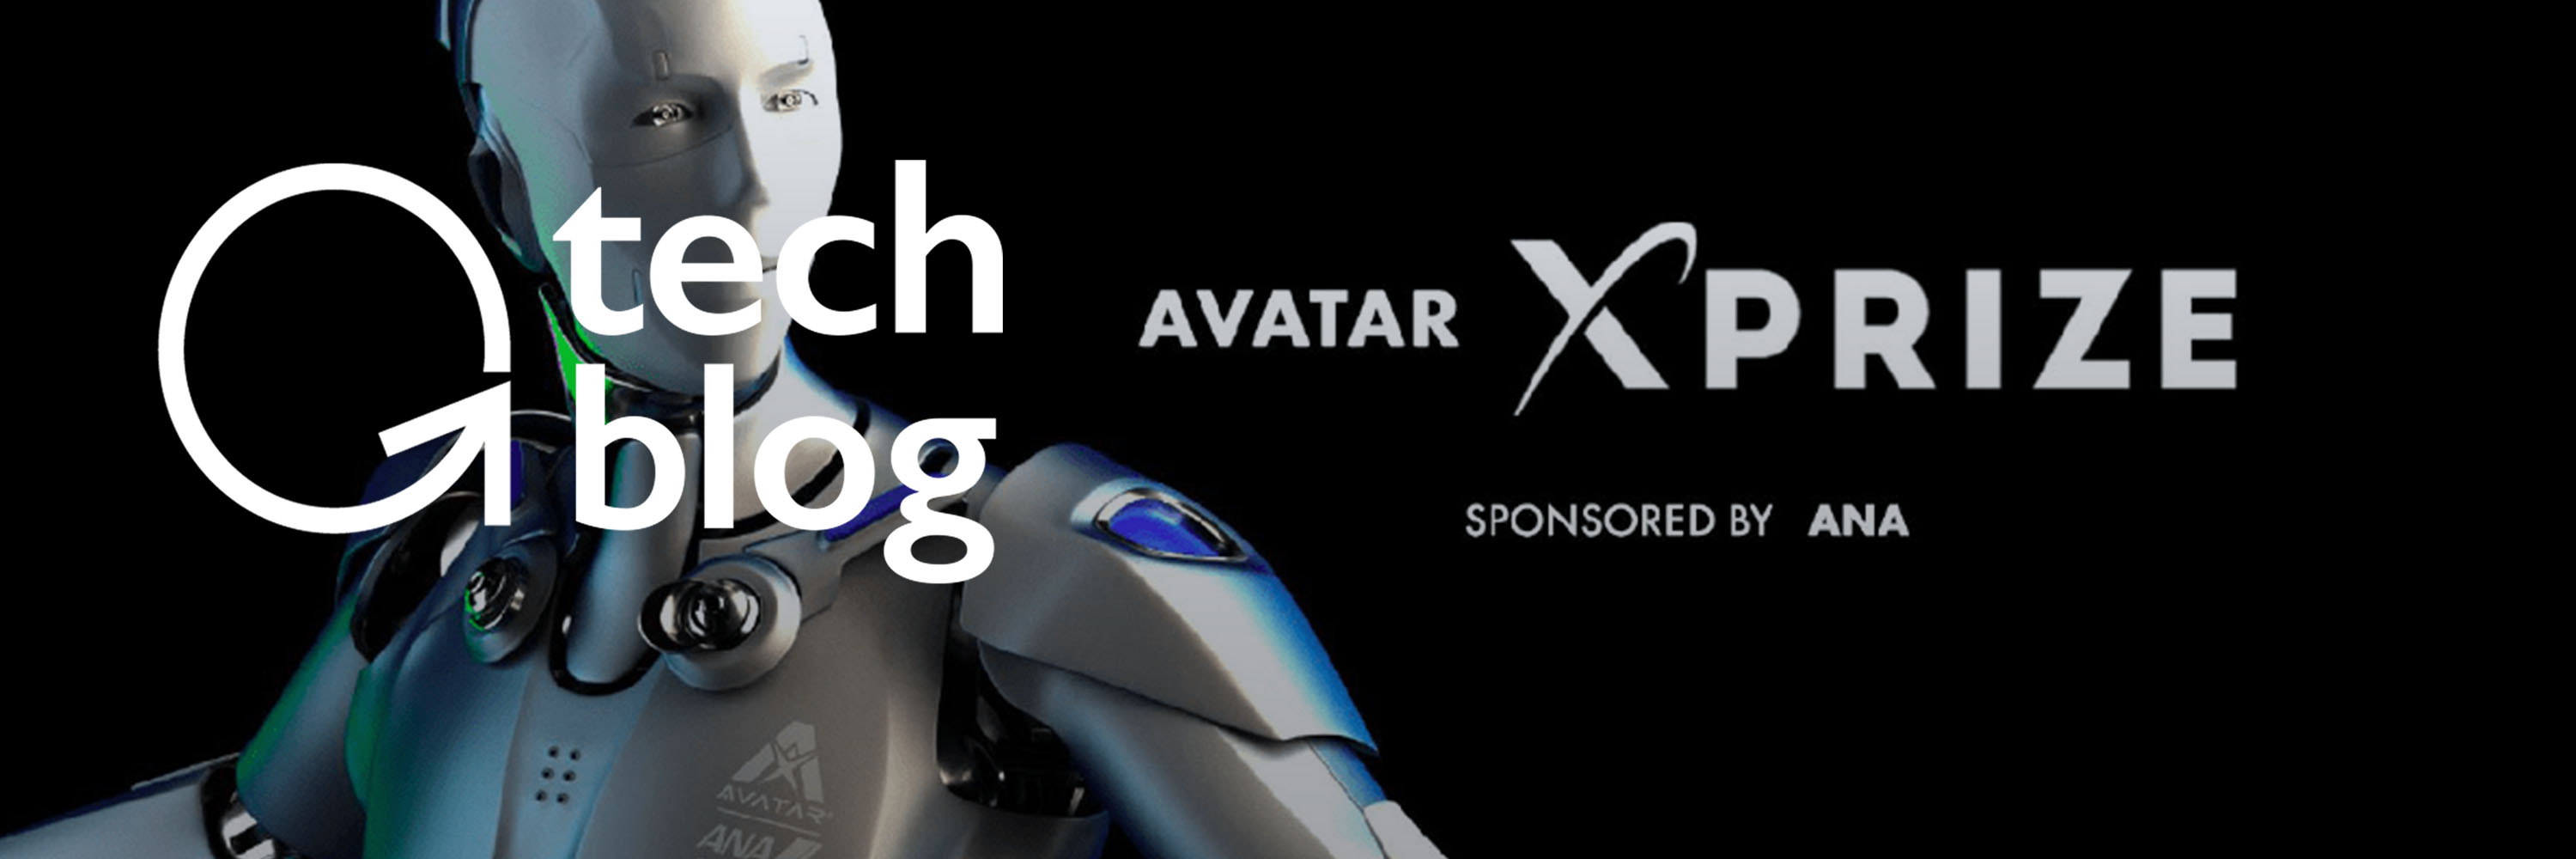 German team wins 5 million ANA Avatar XPrize in spacethemed competition   SpaceNews